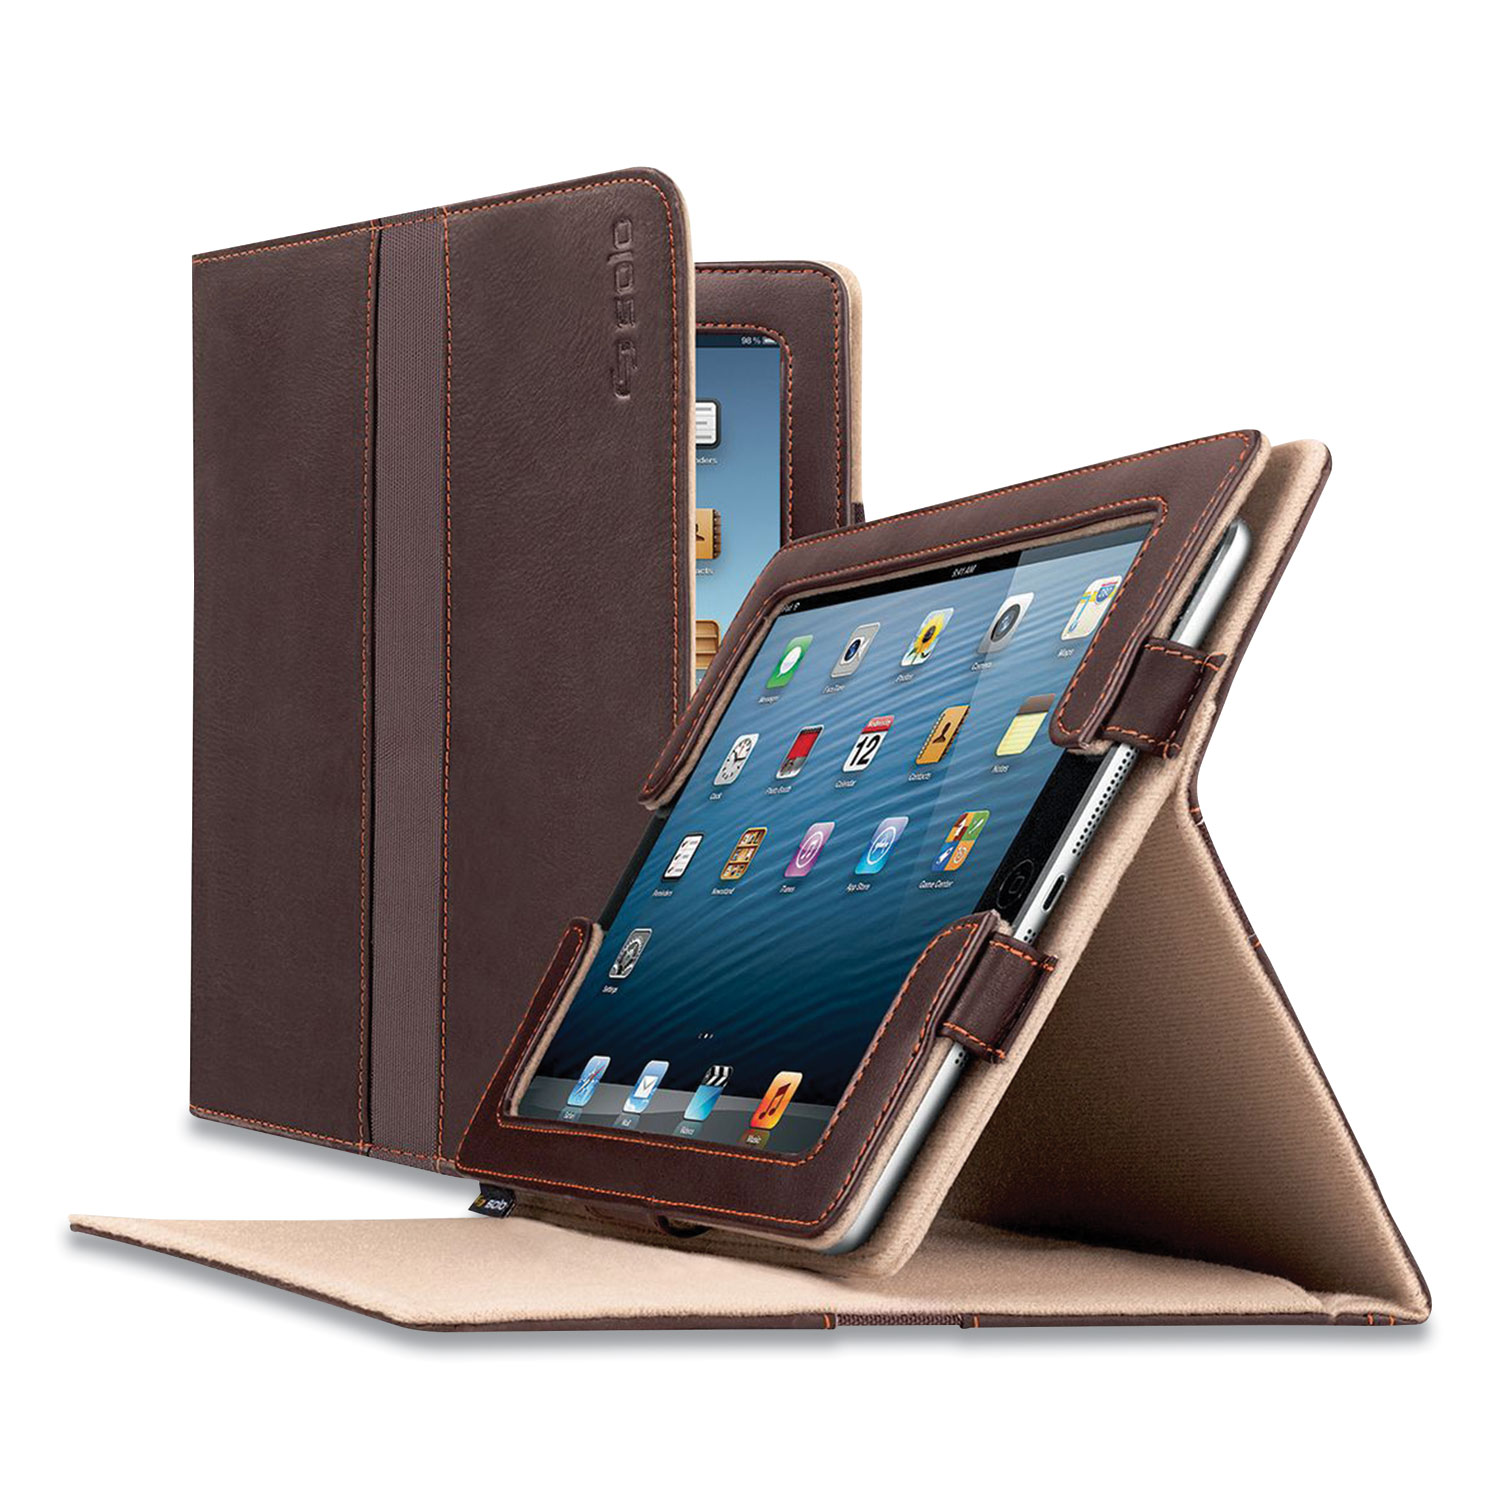 Solo Ascent Leather Case for iPad/iPad 2/3rd Gen/4th Gen, Brown